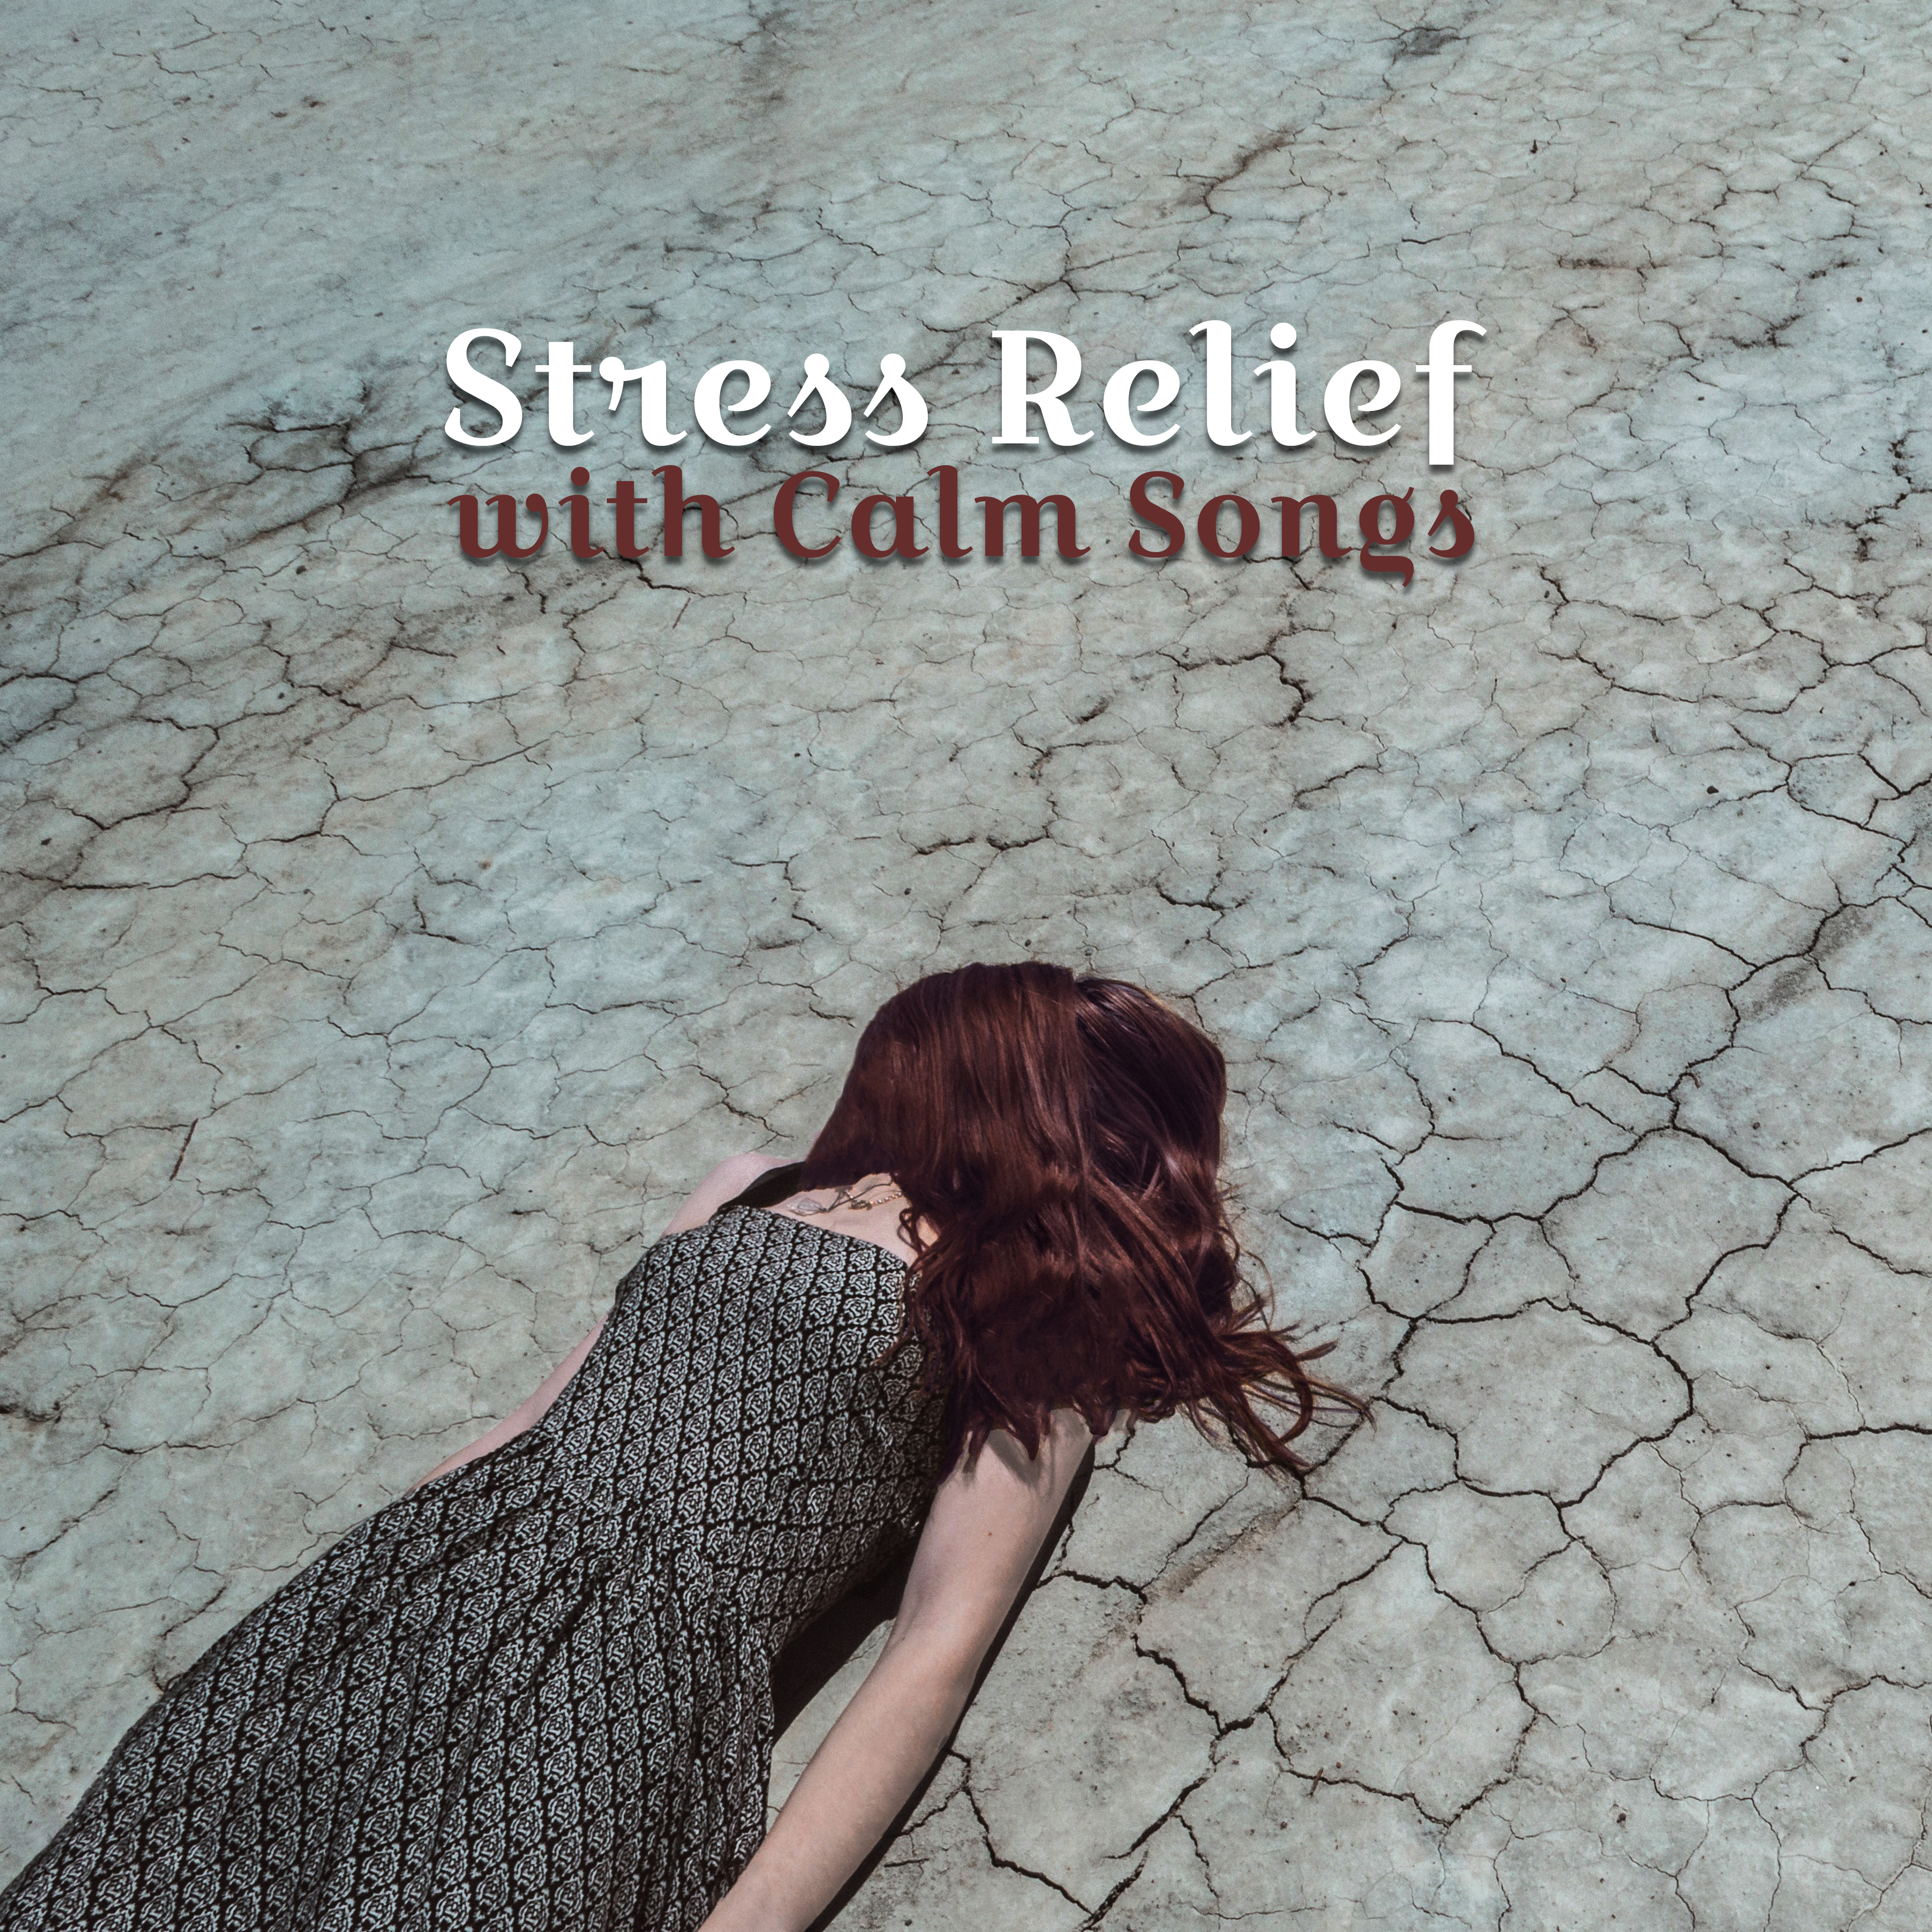 Stress Relief with Calm Songs – Ambient Sounds to Relax, New Age Music, Rest with Peaceful Waves